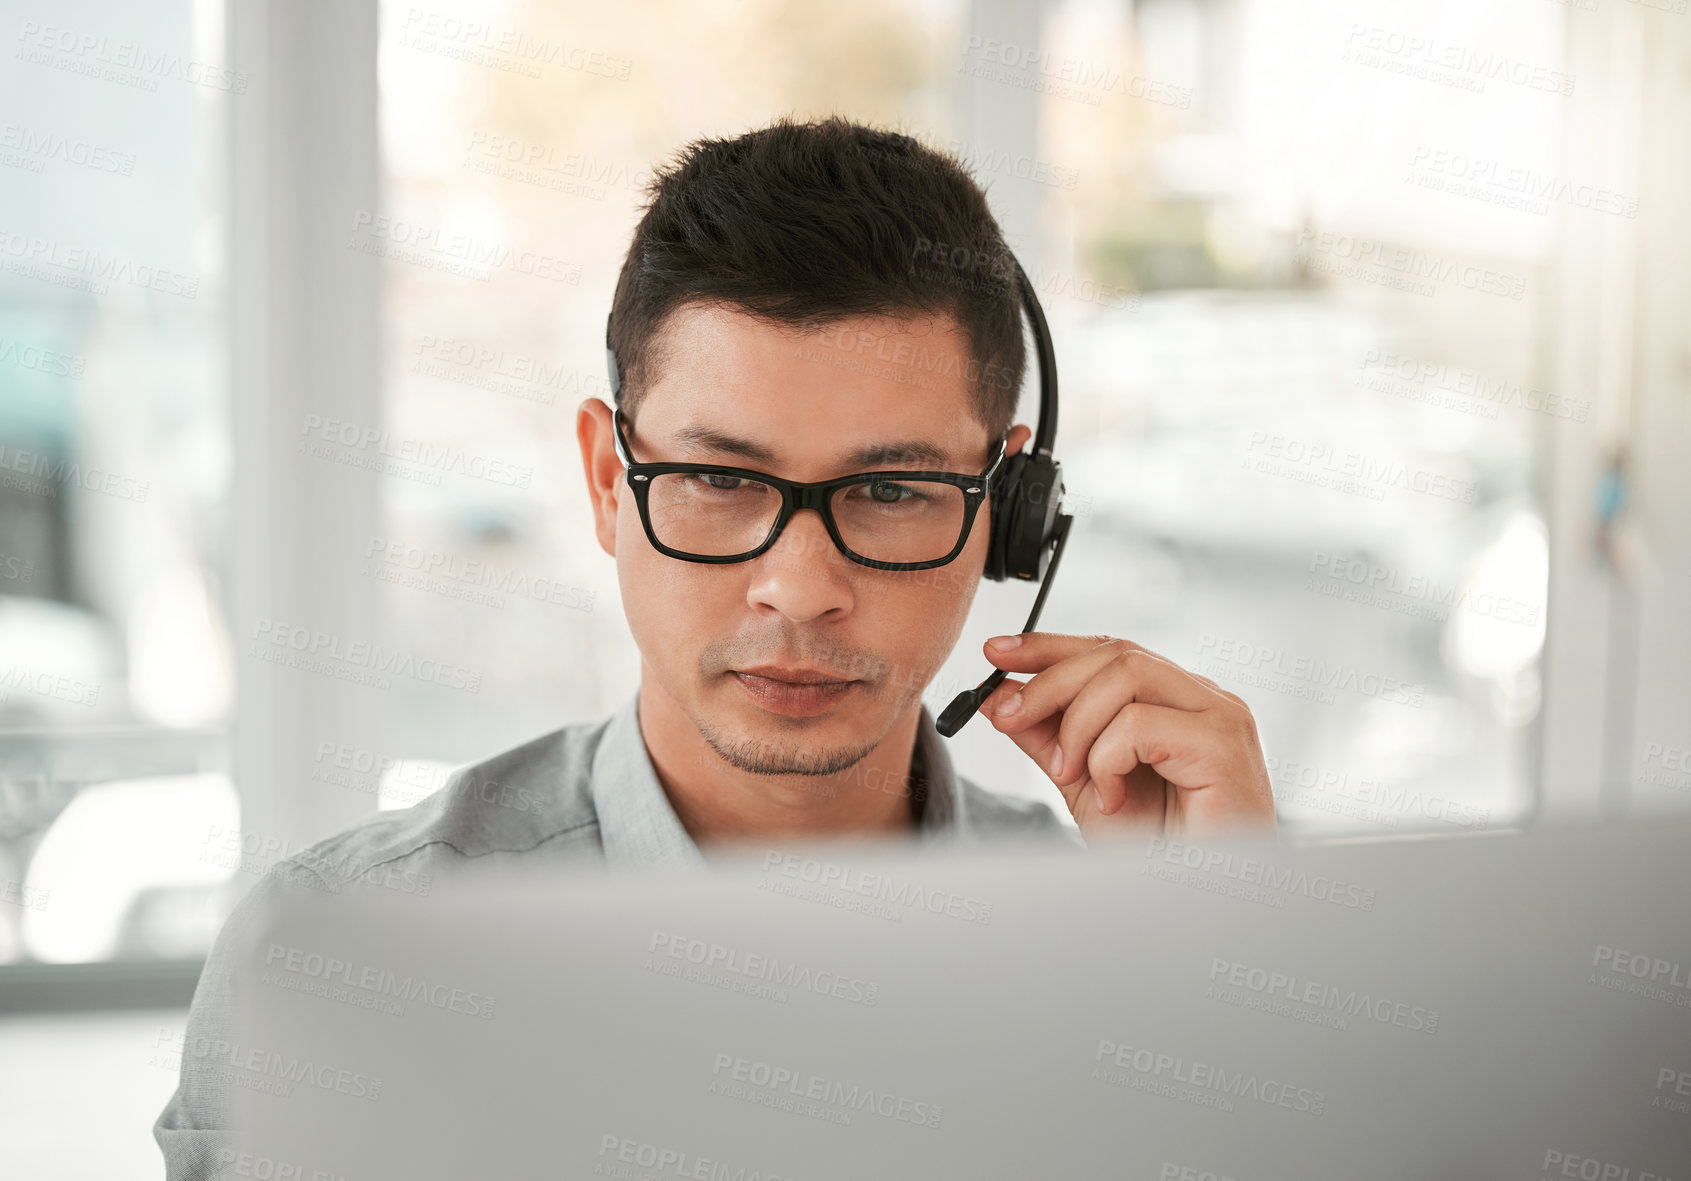 Buy stock photo Shot of a young male call center agent at work